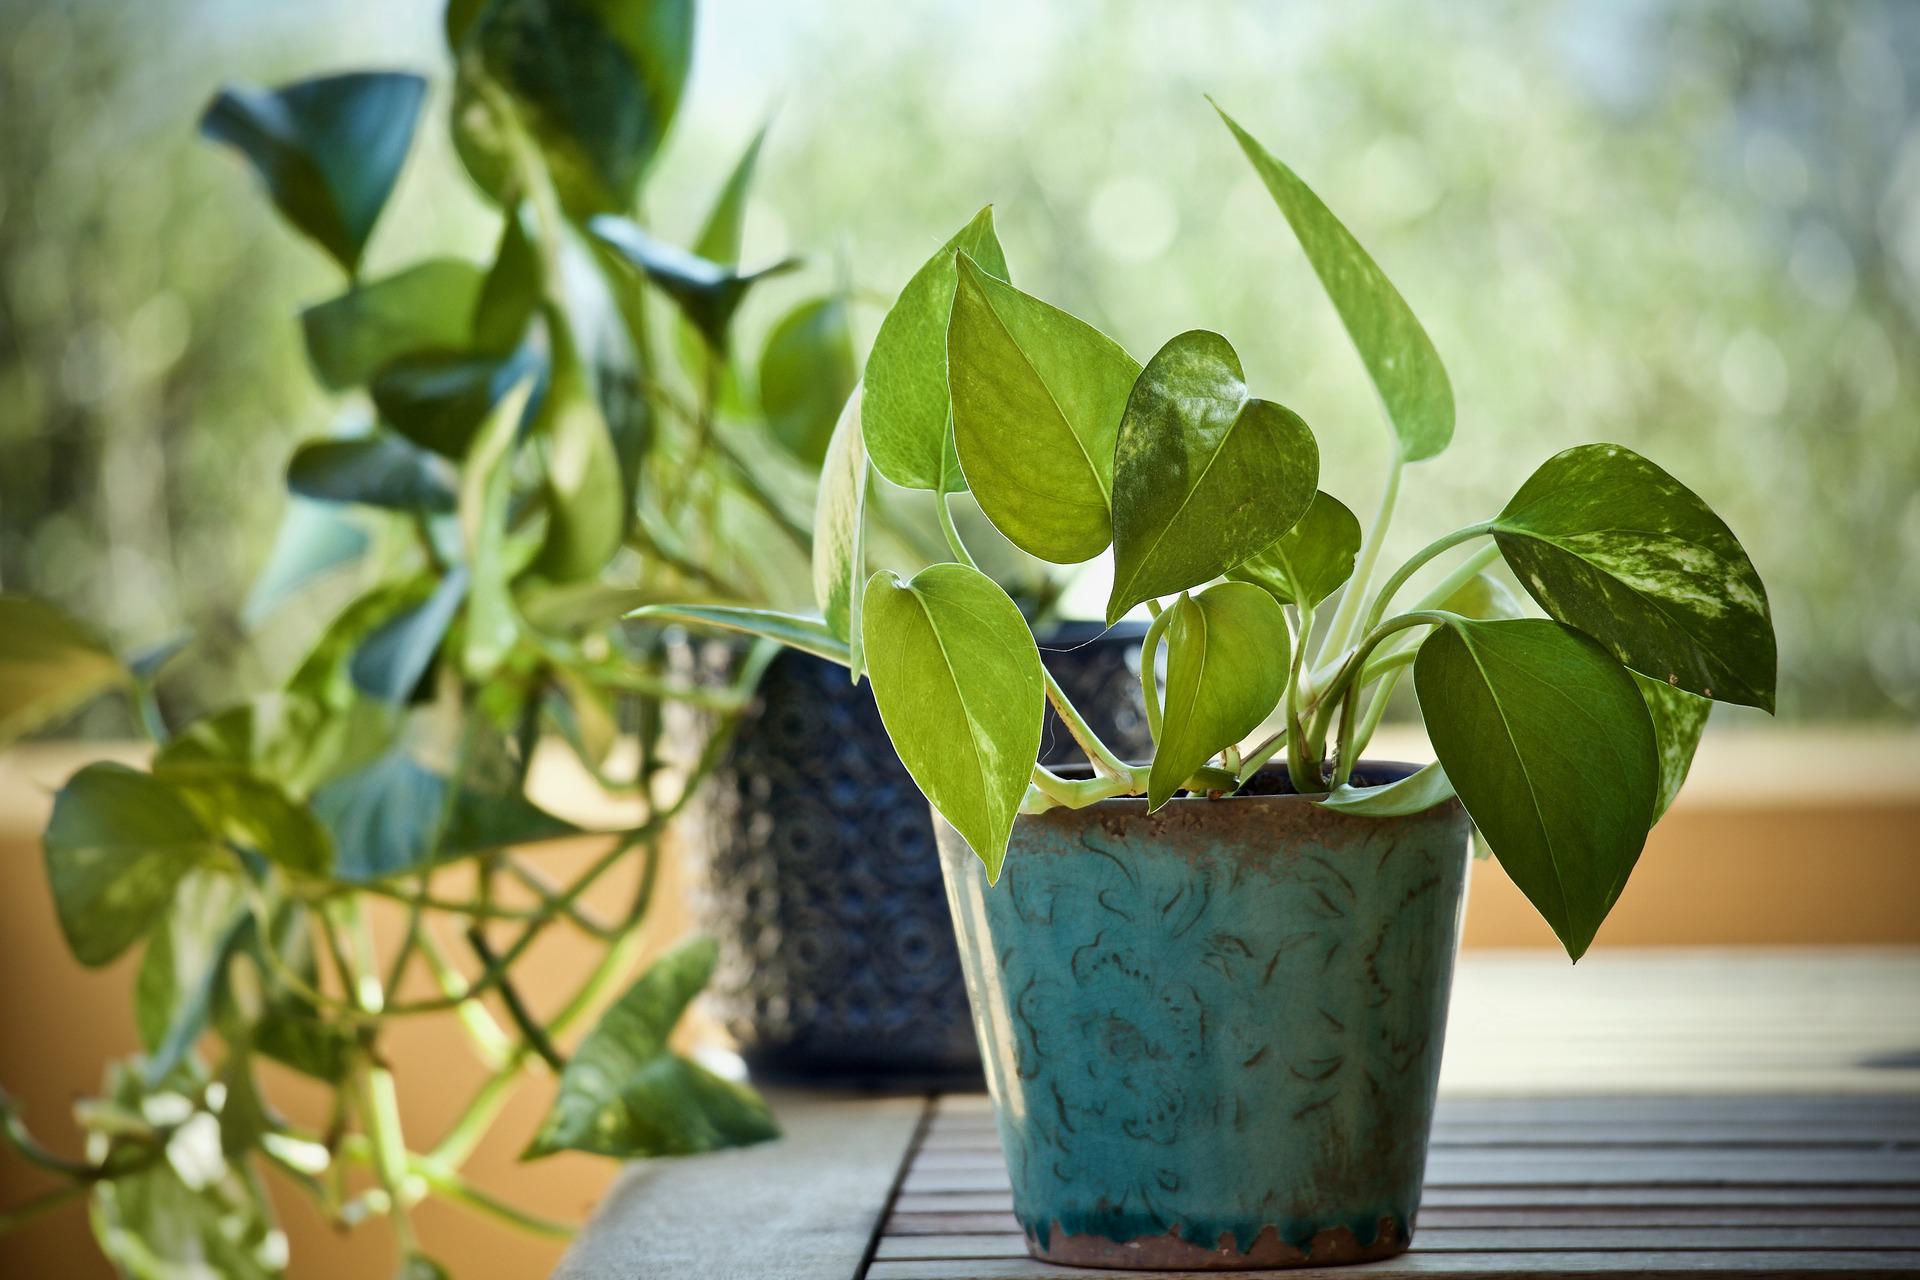 A green pothos plant with marbled leaves in a teal ceramic pot on a wooden table. A darker green pothos plant that trails off the table is in the background.